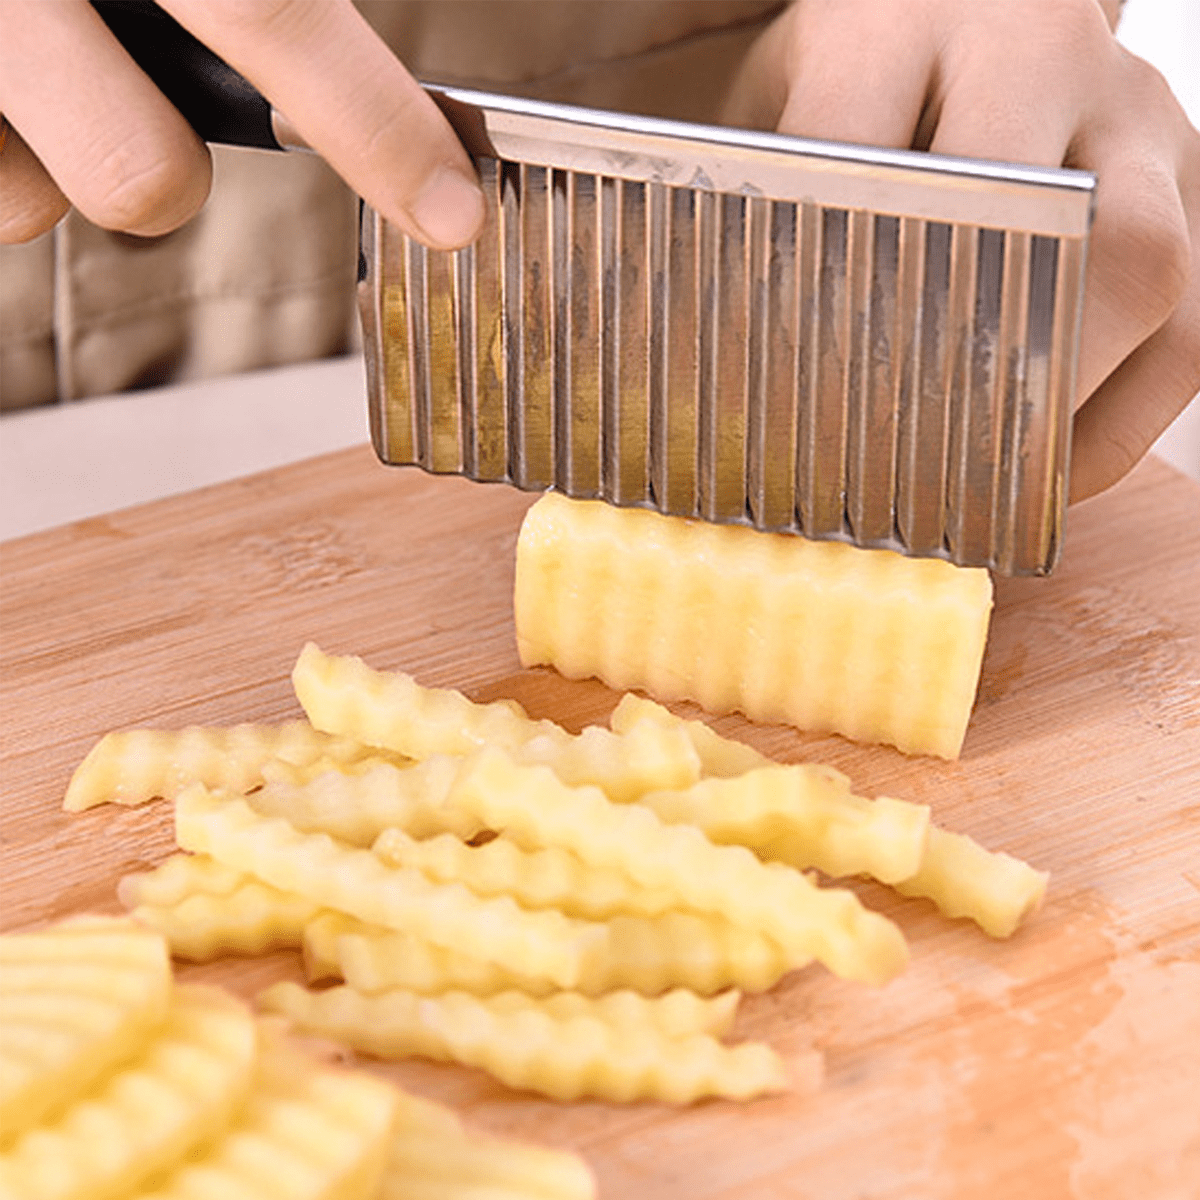 Stainless Steel Onion Slicer Devices Potato Cucumber Cutter Comb Kichen  Accessories Tools Gadgets for Home Safe Cutting Tools